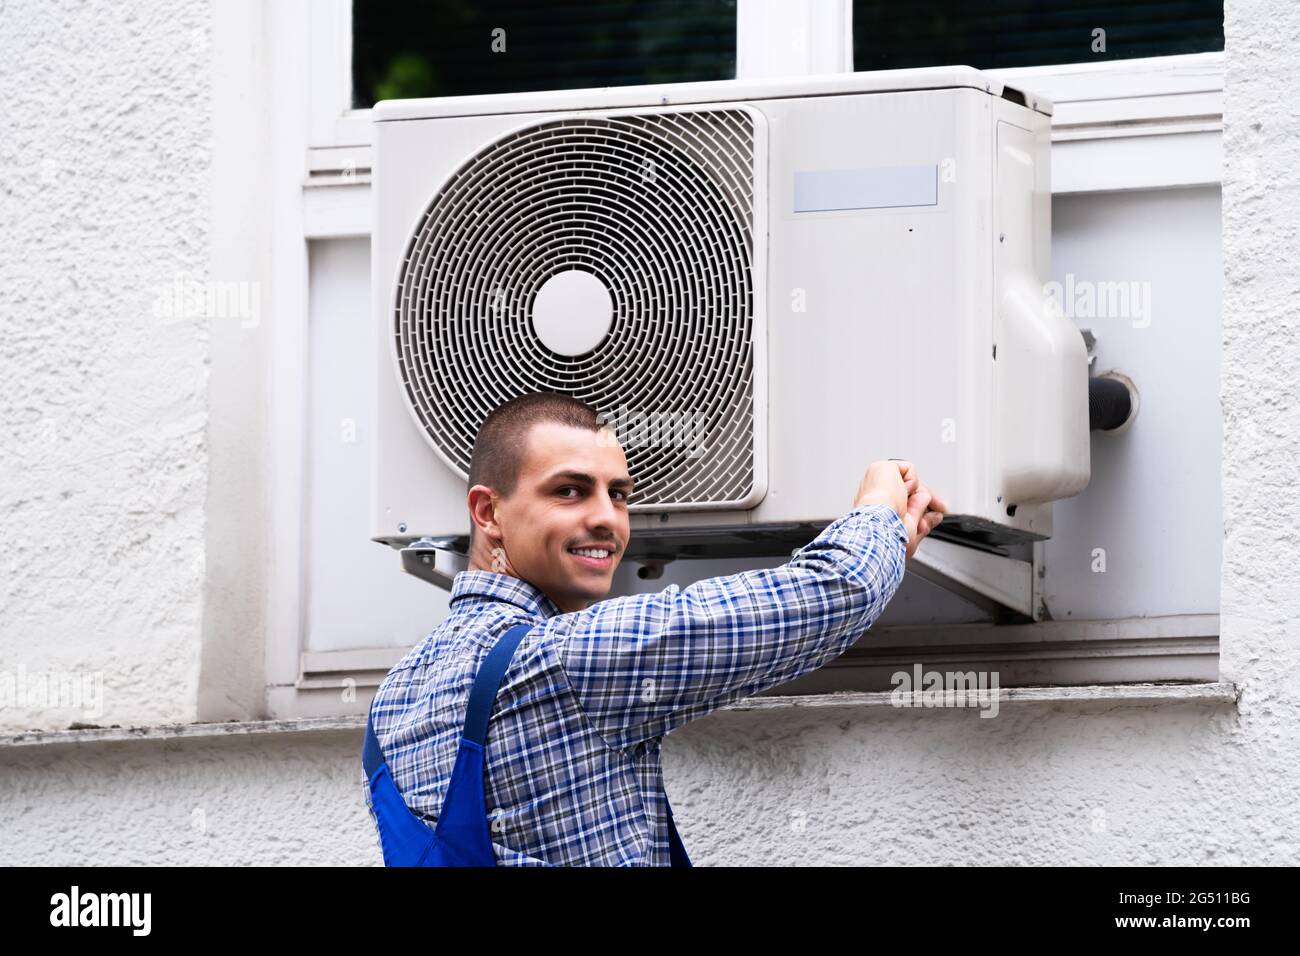 Technician Cleaning And Repairing Air Condition Appliance. AC Unit Maintenance Stock Photo